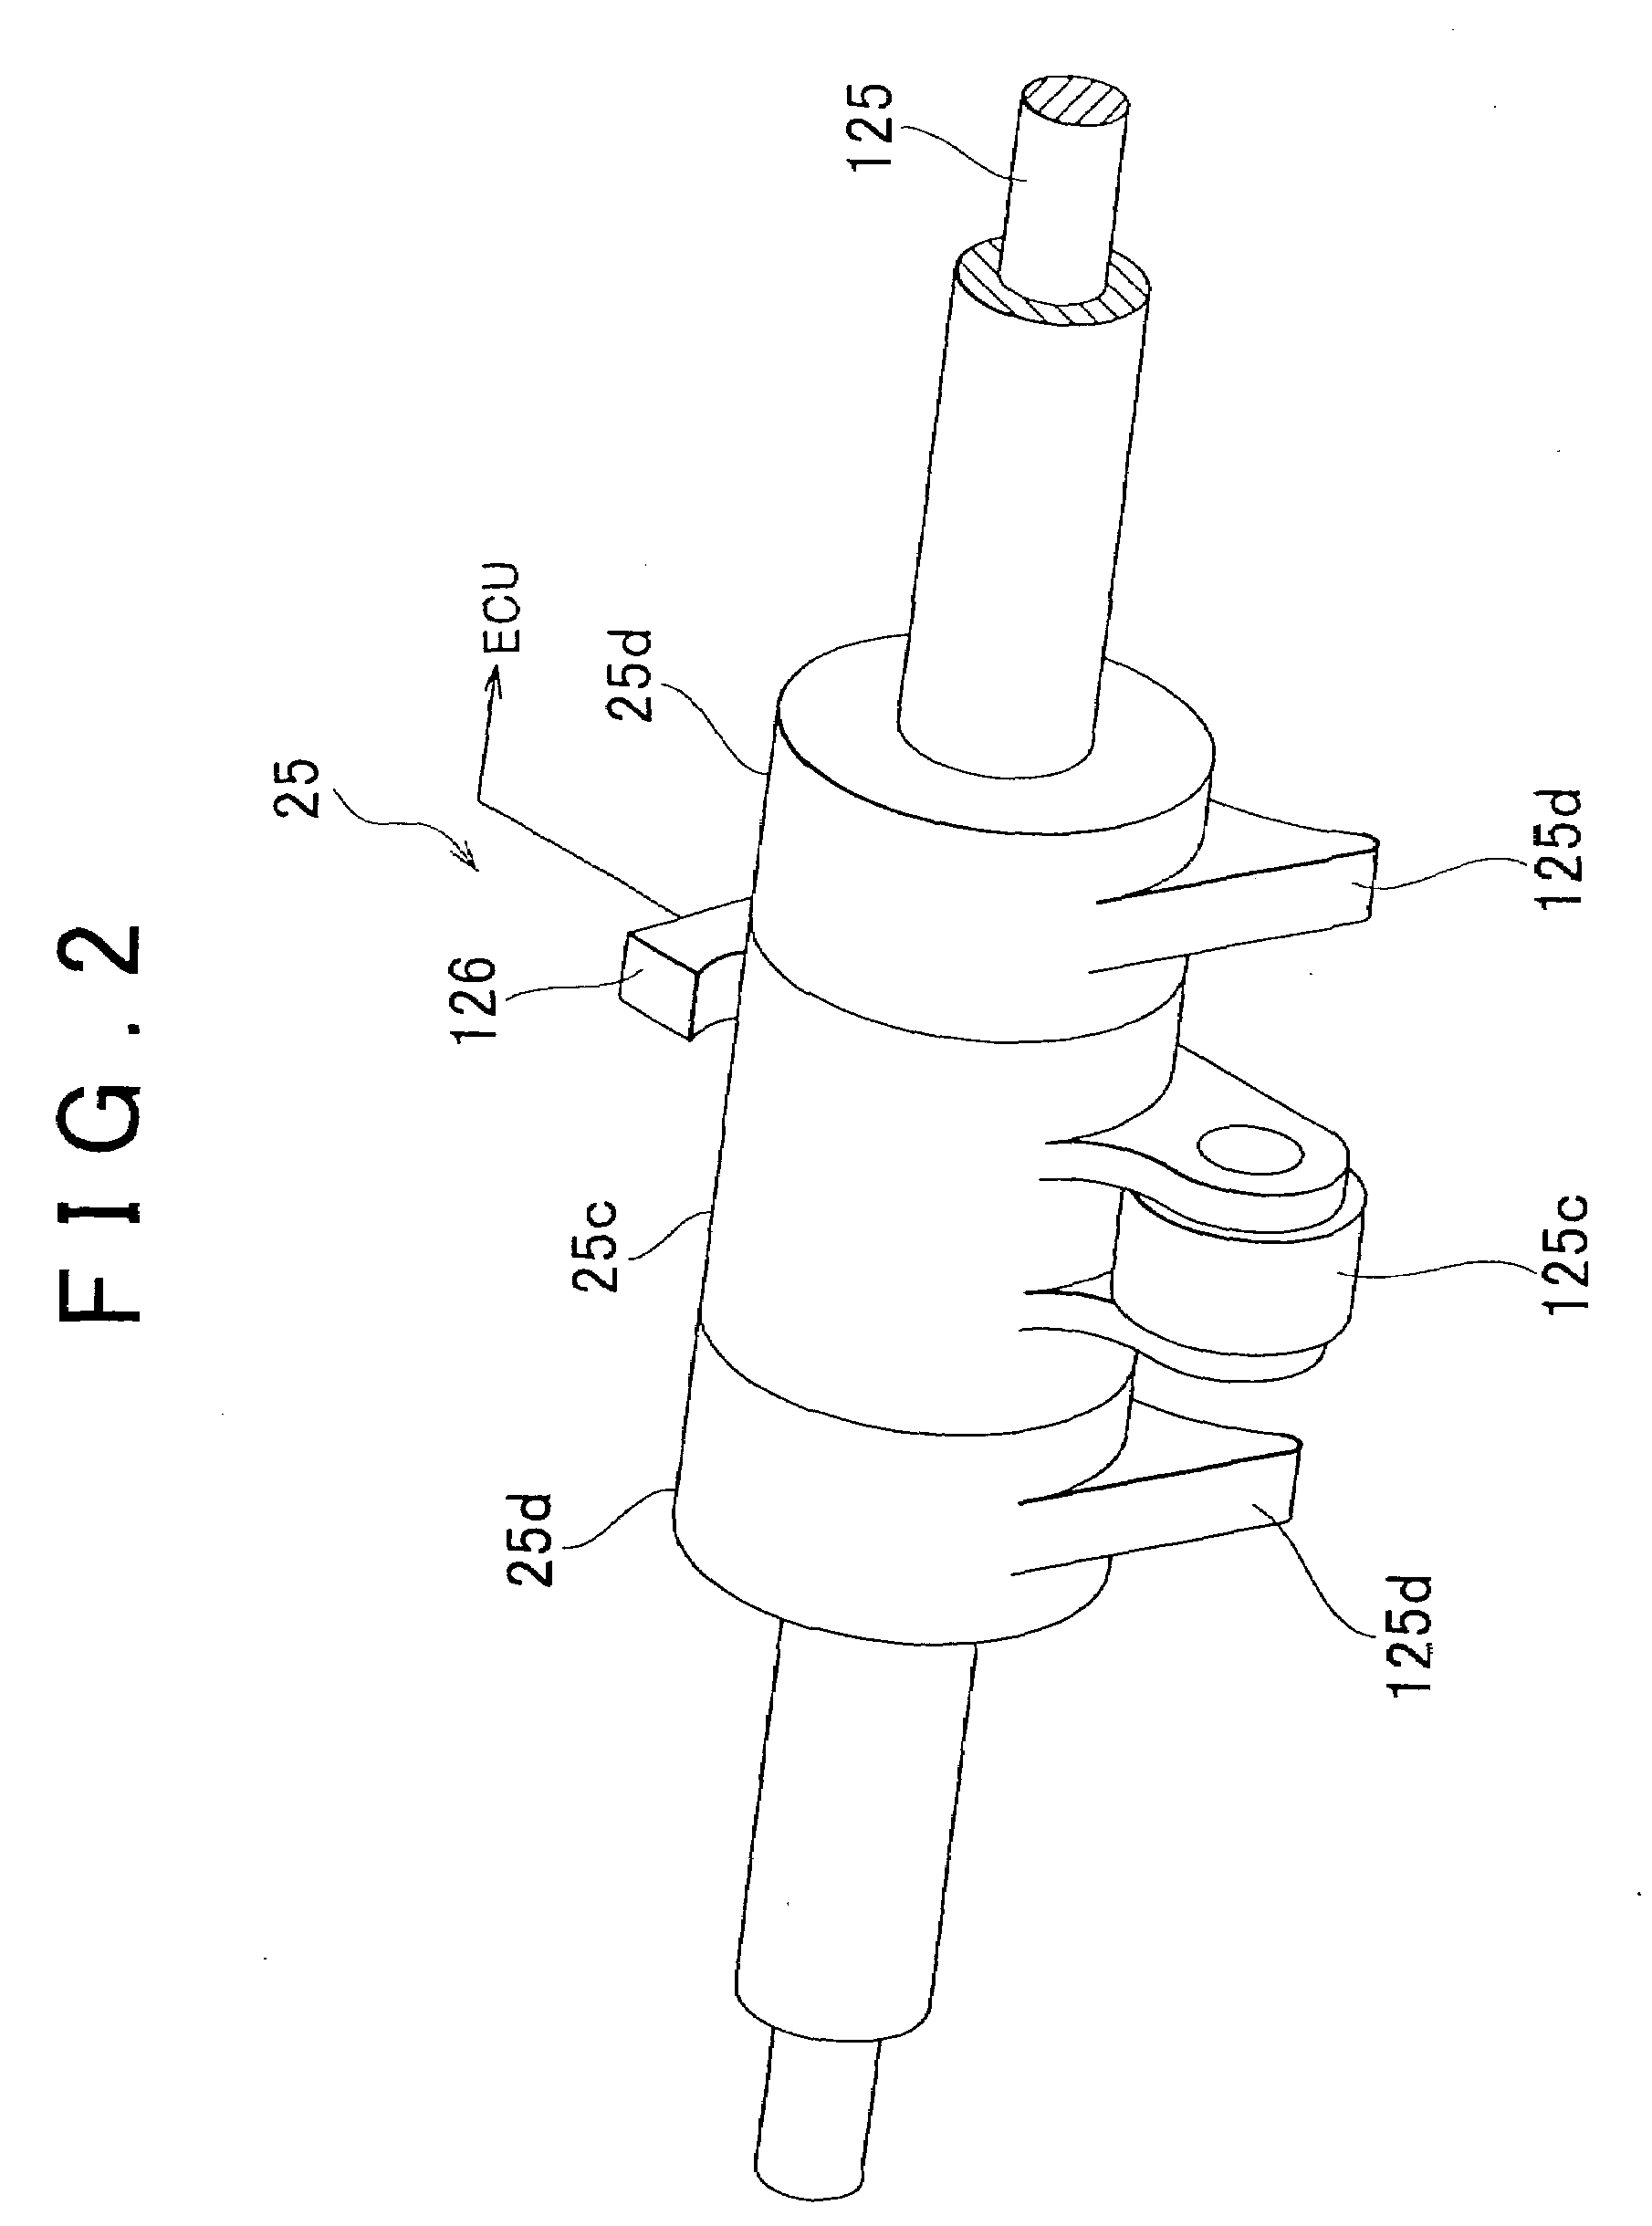 Internal combustion engine with variable compression ratio and valve characteristics